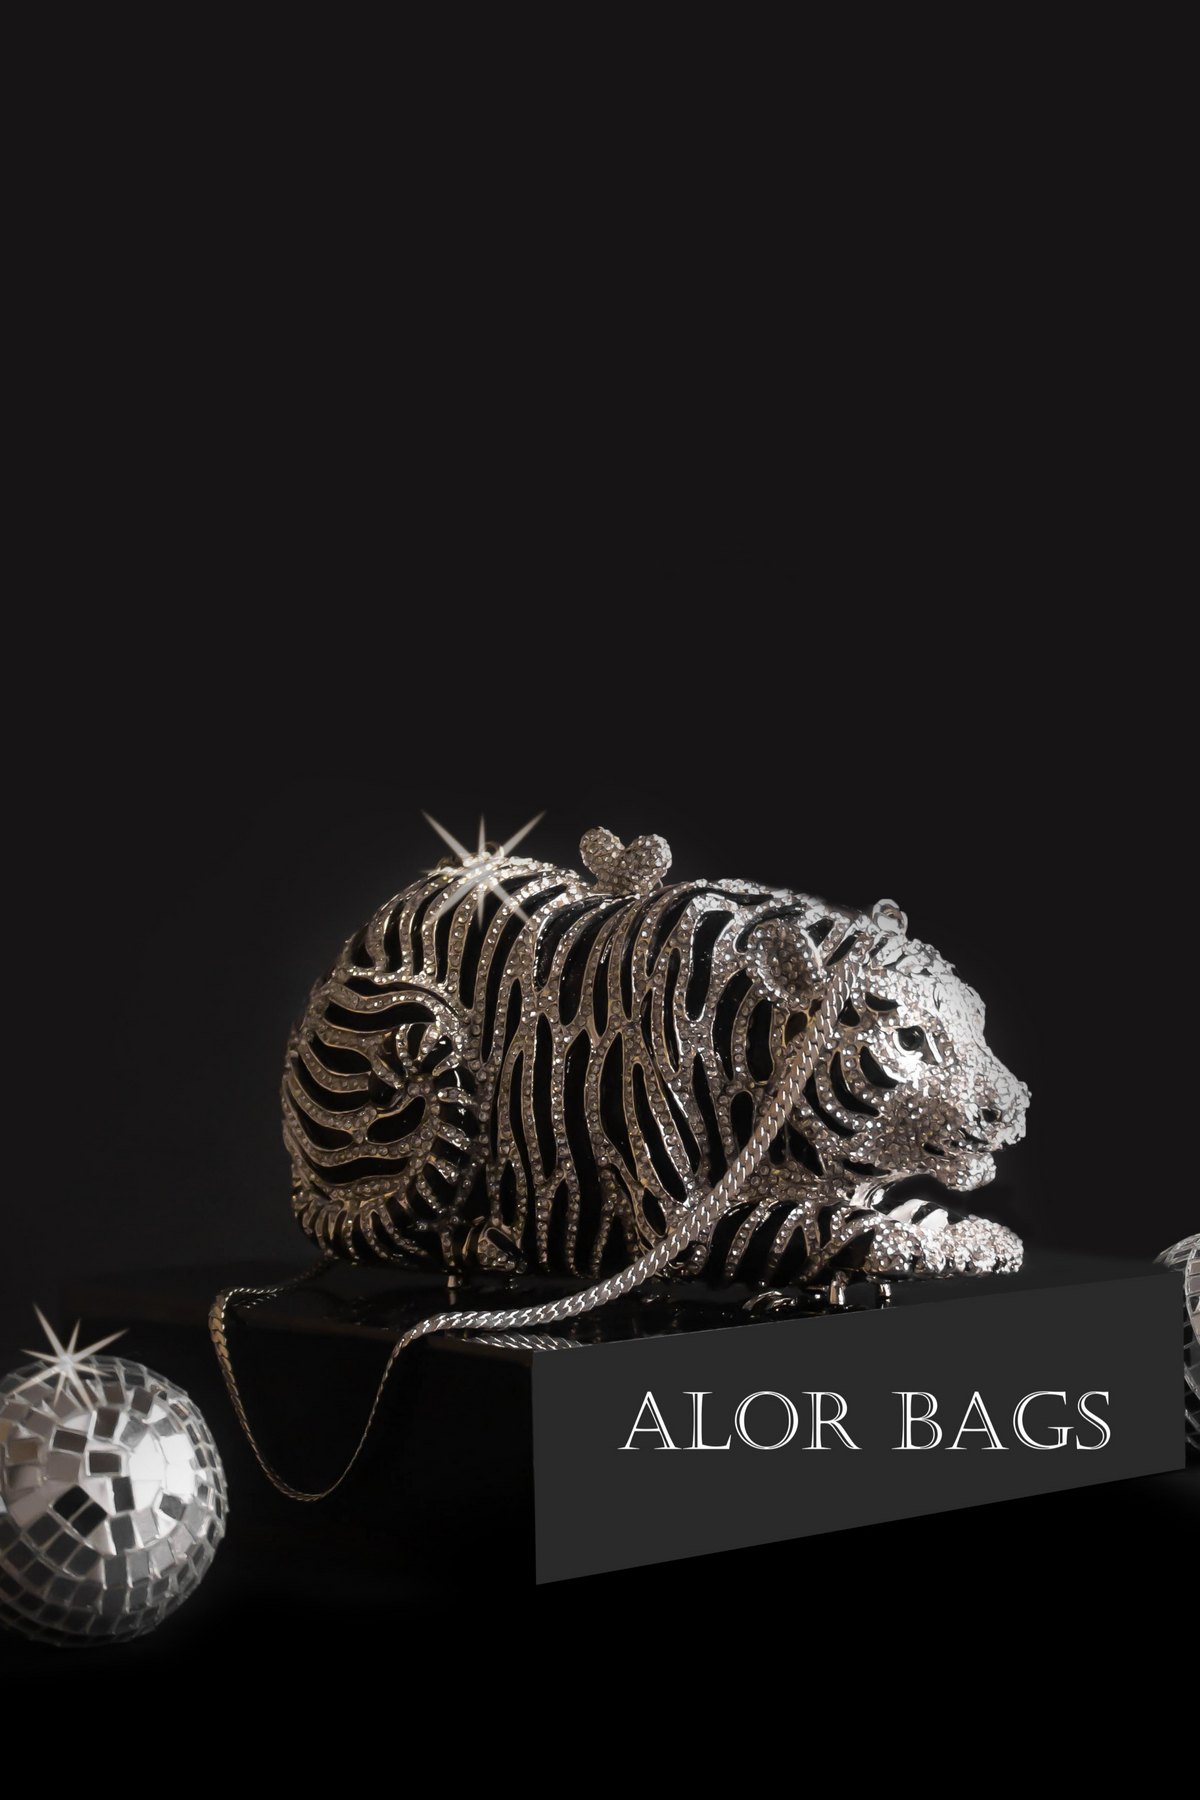 The Silver Tiger Clutch